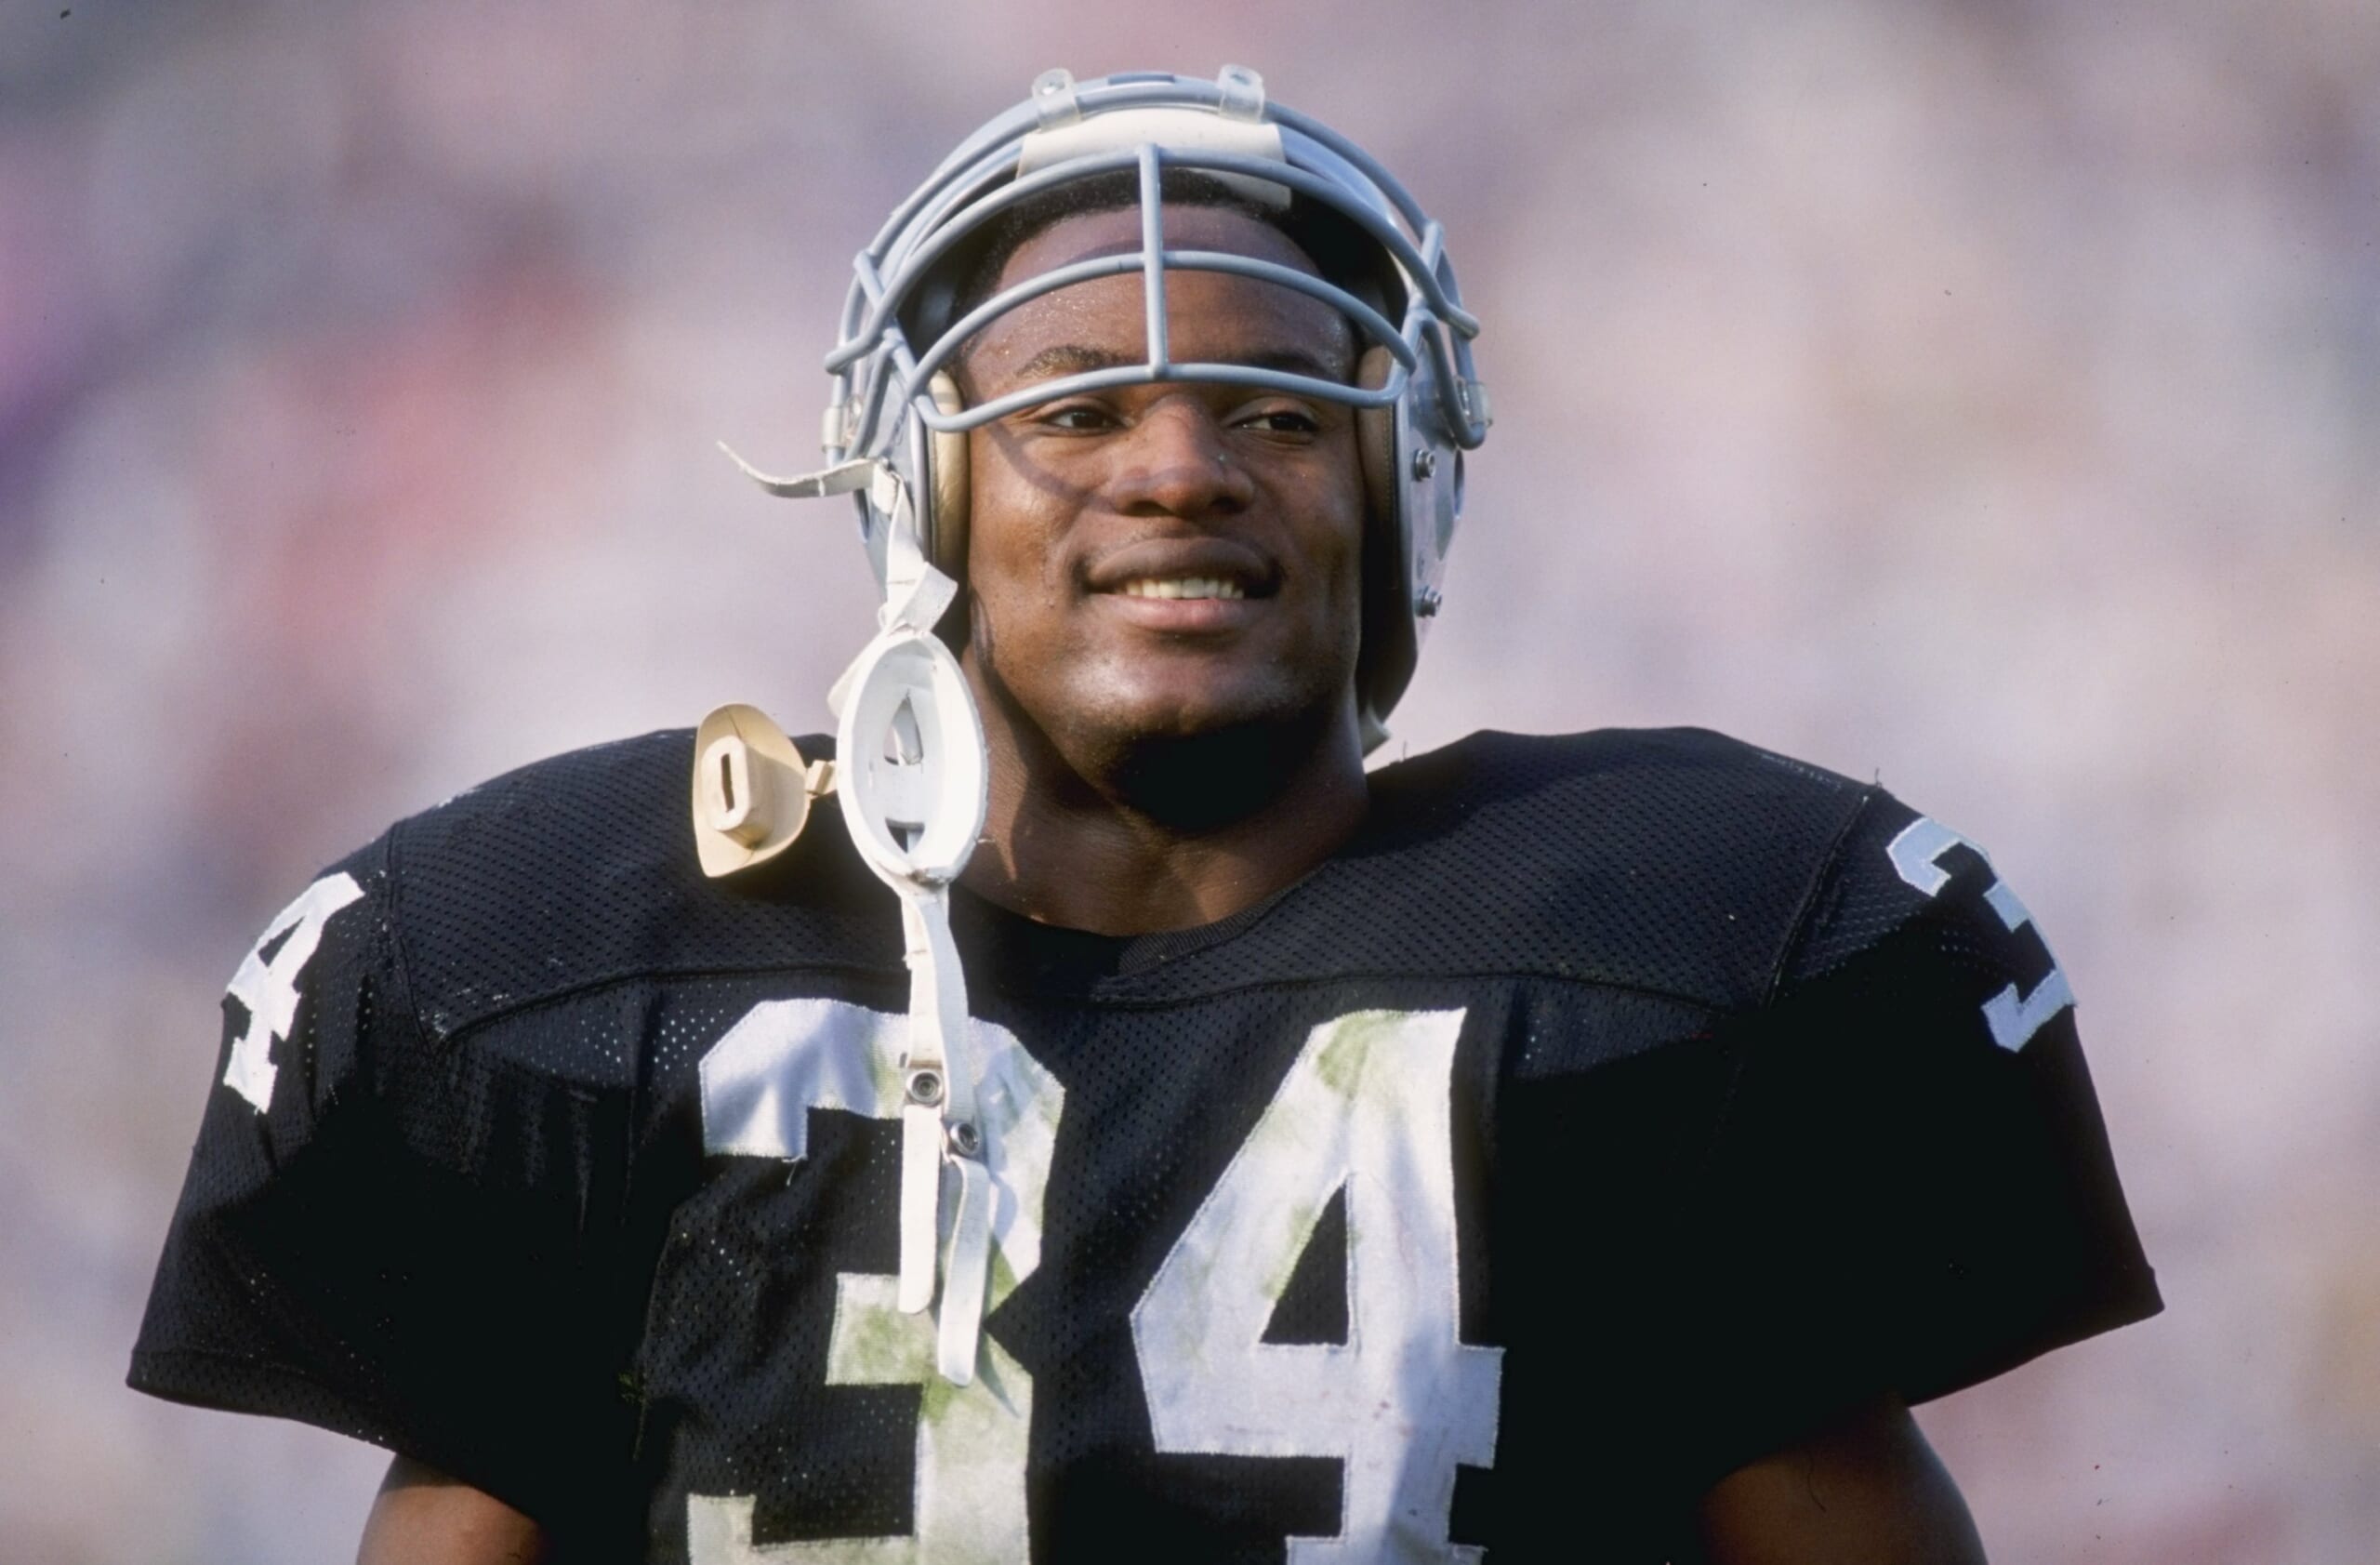 Bo Jackson's top five career highlights to celebrate his 55th birthday